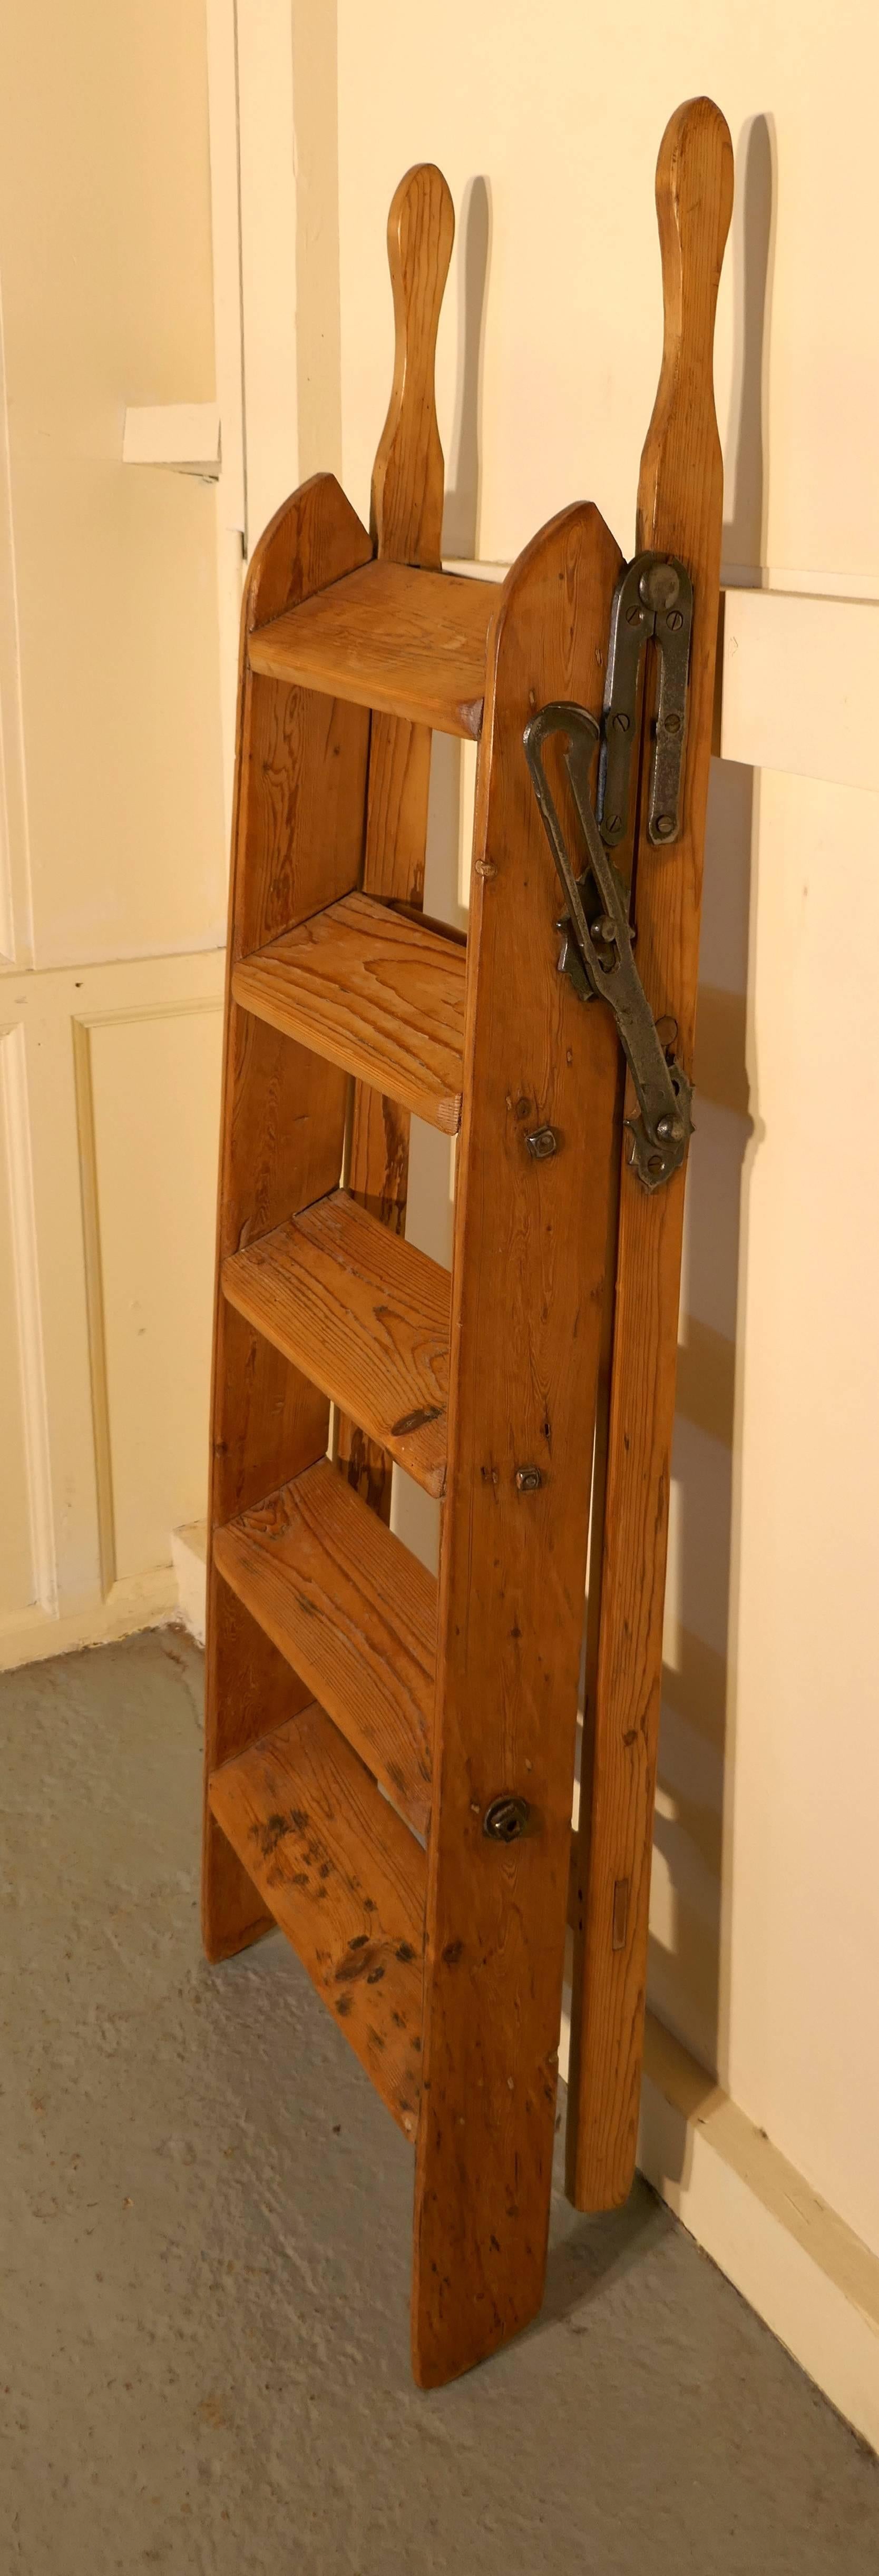 Tall Victorian multi use shop step ladder
This is a very useful and attractive piece, the step ladder has 5, 4.5” treads, it folds flat for handy storage and would work well in a kitchen, shop, library or anywhere where a little extra height would